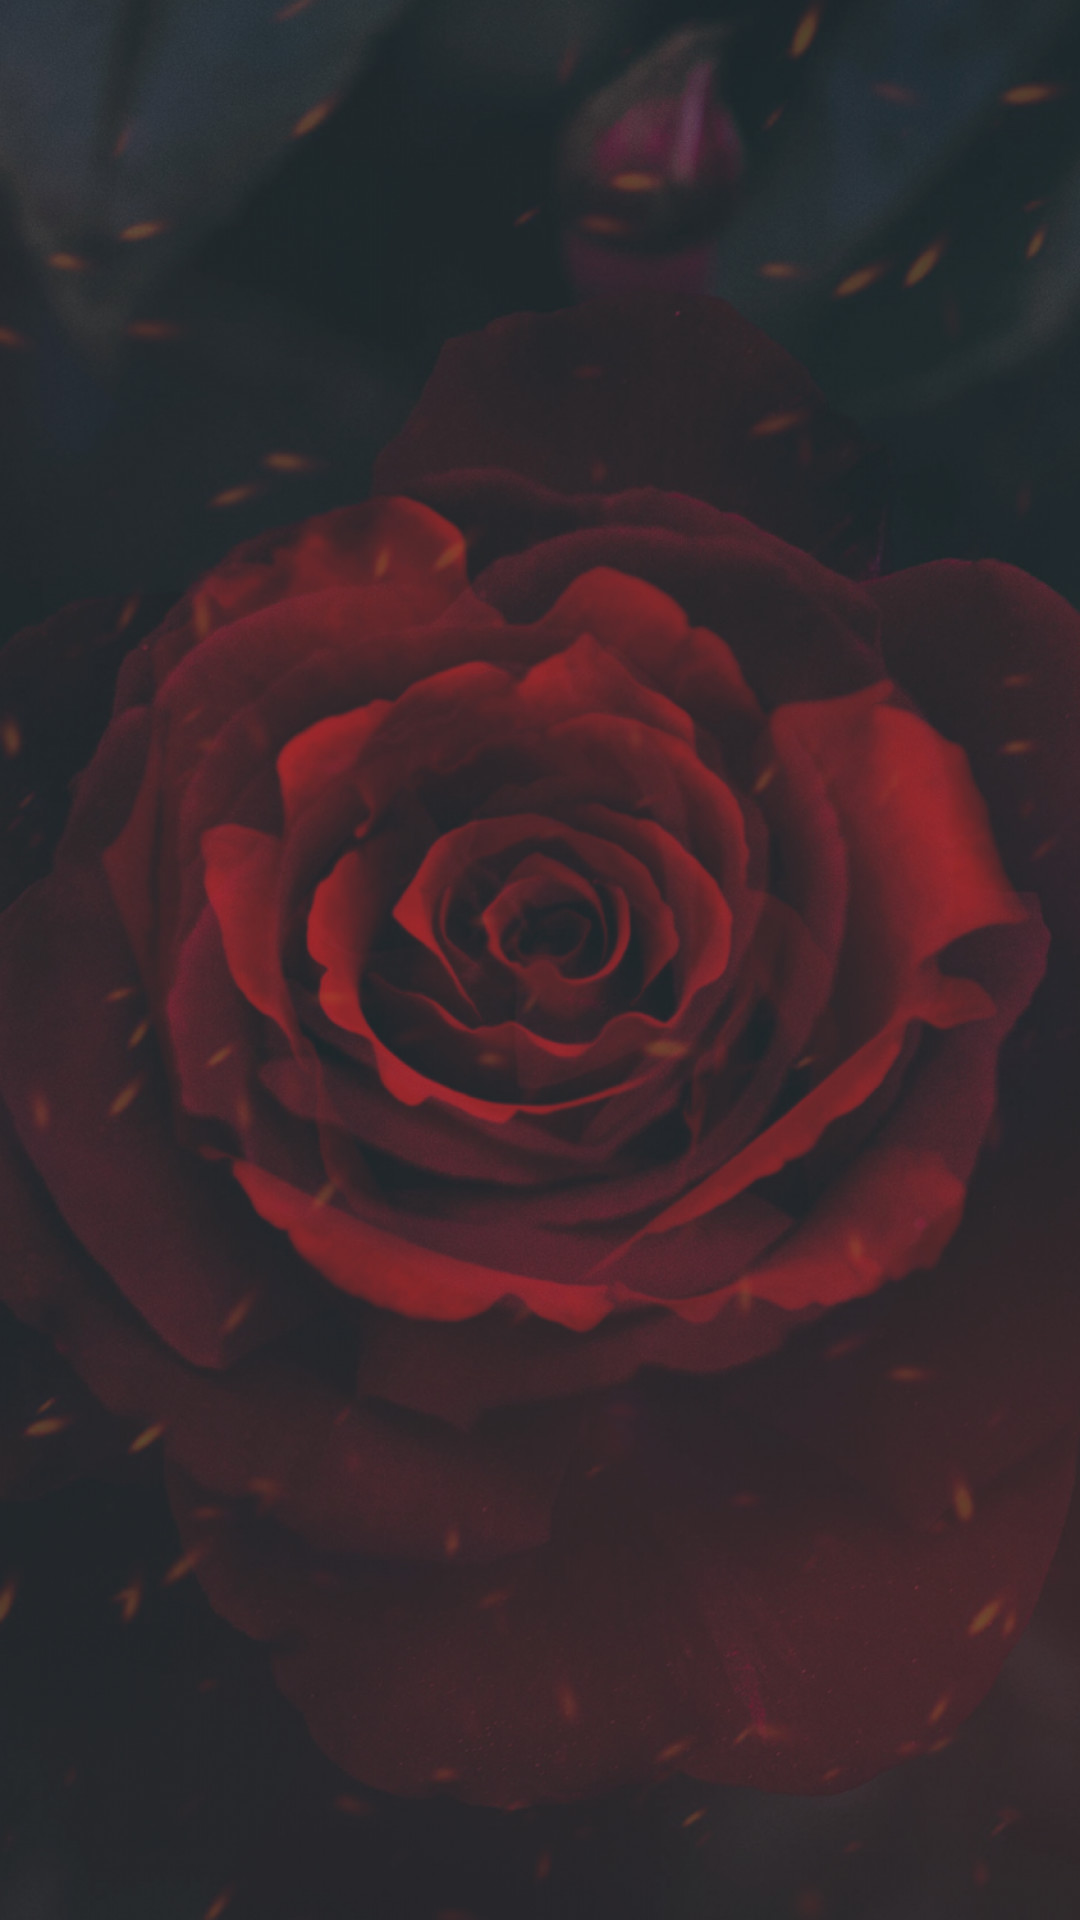 Download Aesthetic Red Roses Iphone Wallpaper | Wallpapers.com